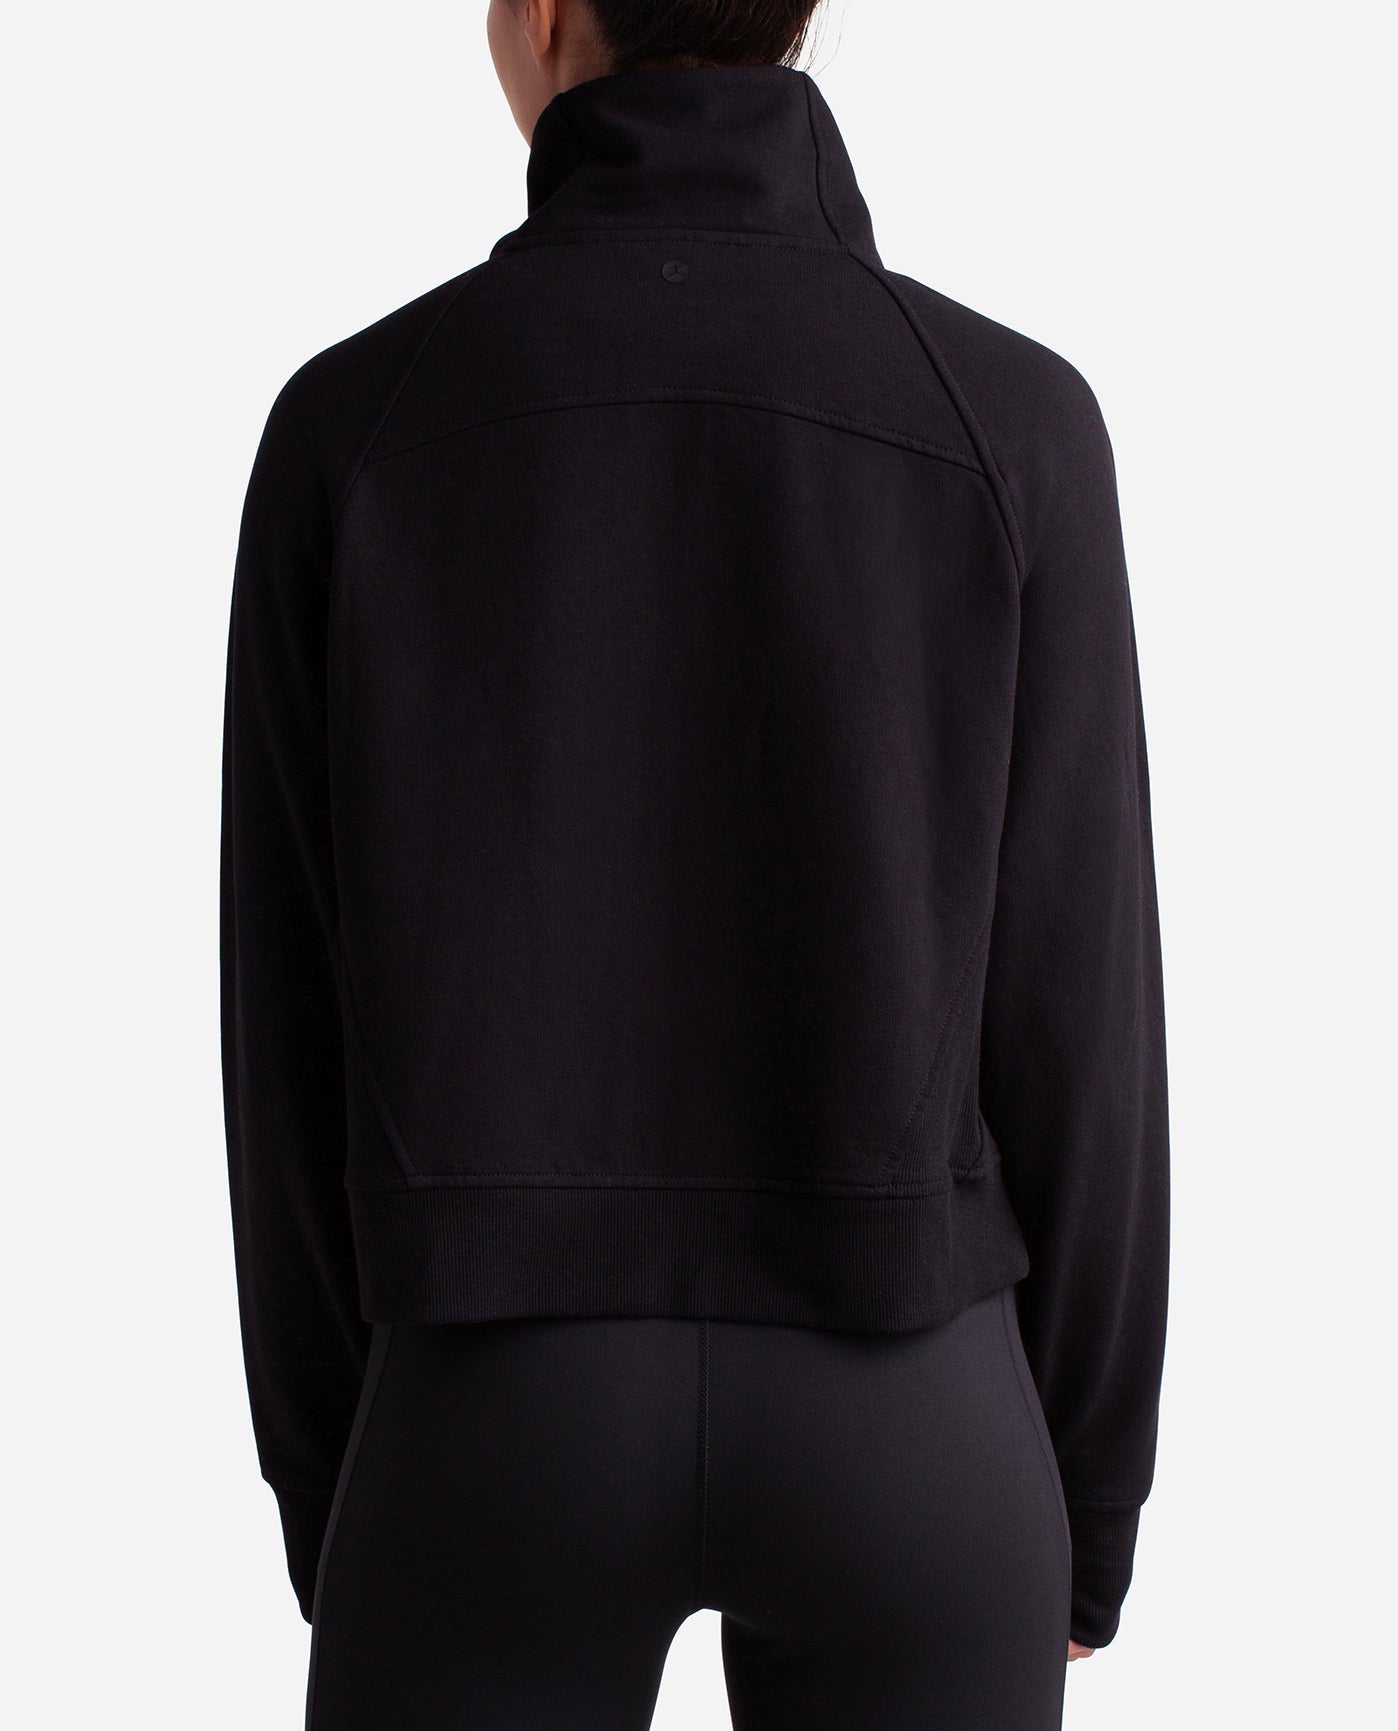 Danskin Now 100% Polyester Solid Black Pullover Hoodie Size 4 - 44